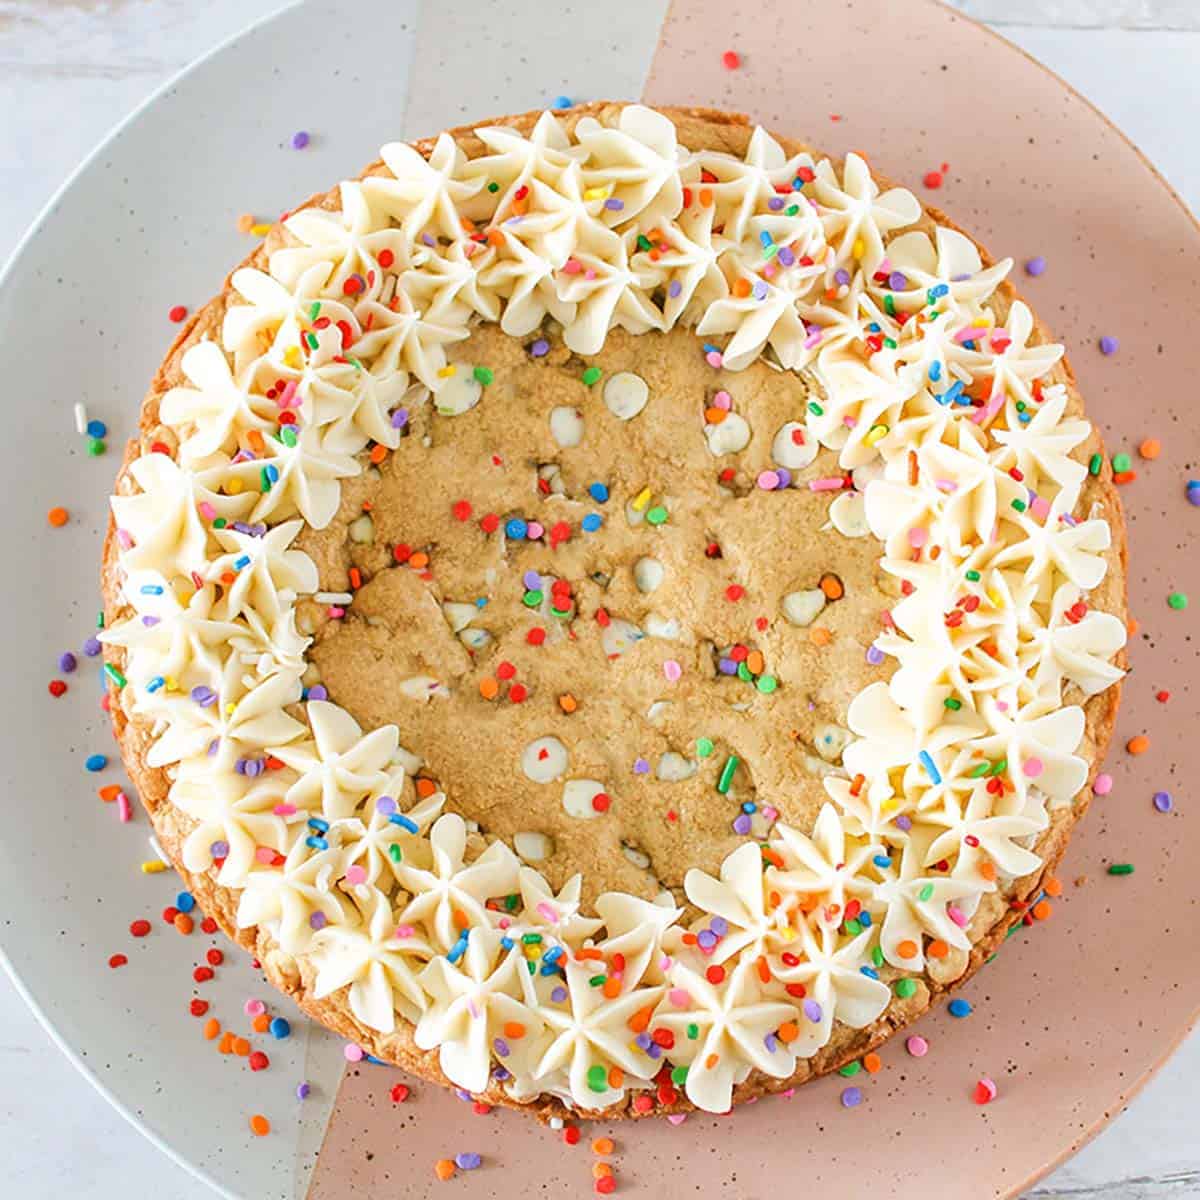 Whole Funfetti Chip Cookie Cake with a vanilla buttercream border and round colorful sprinkles. The cookie cake sits on a white and pink circle platter.